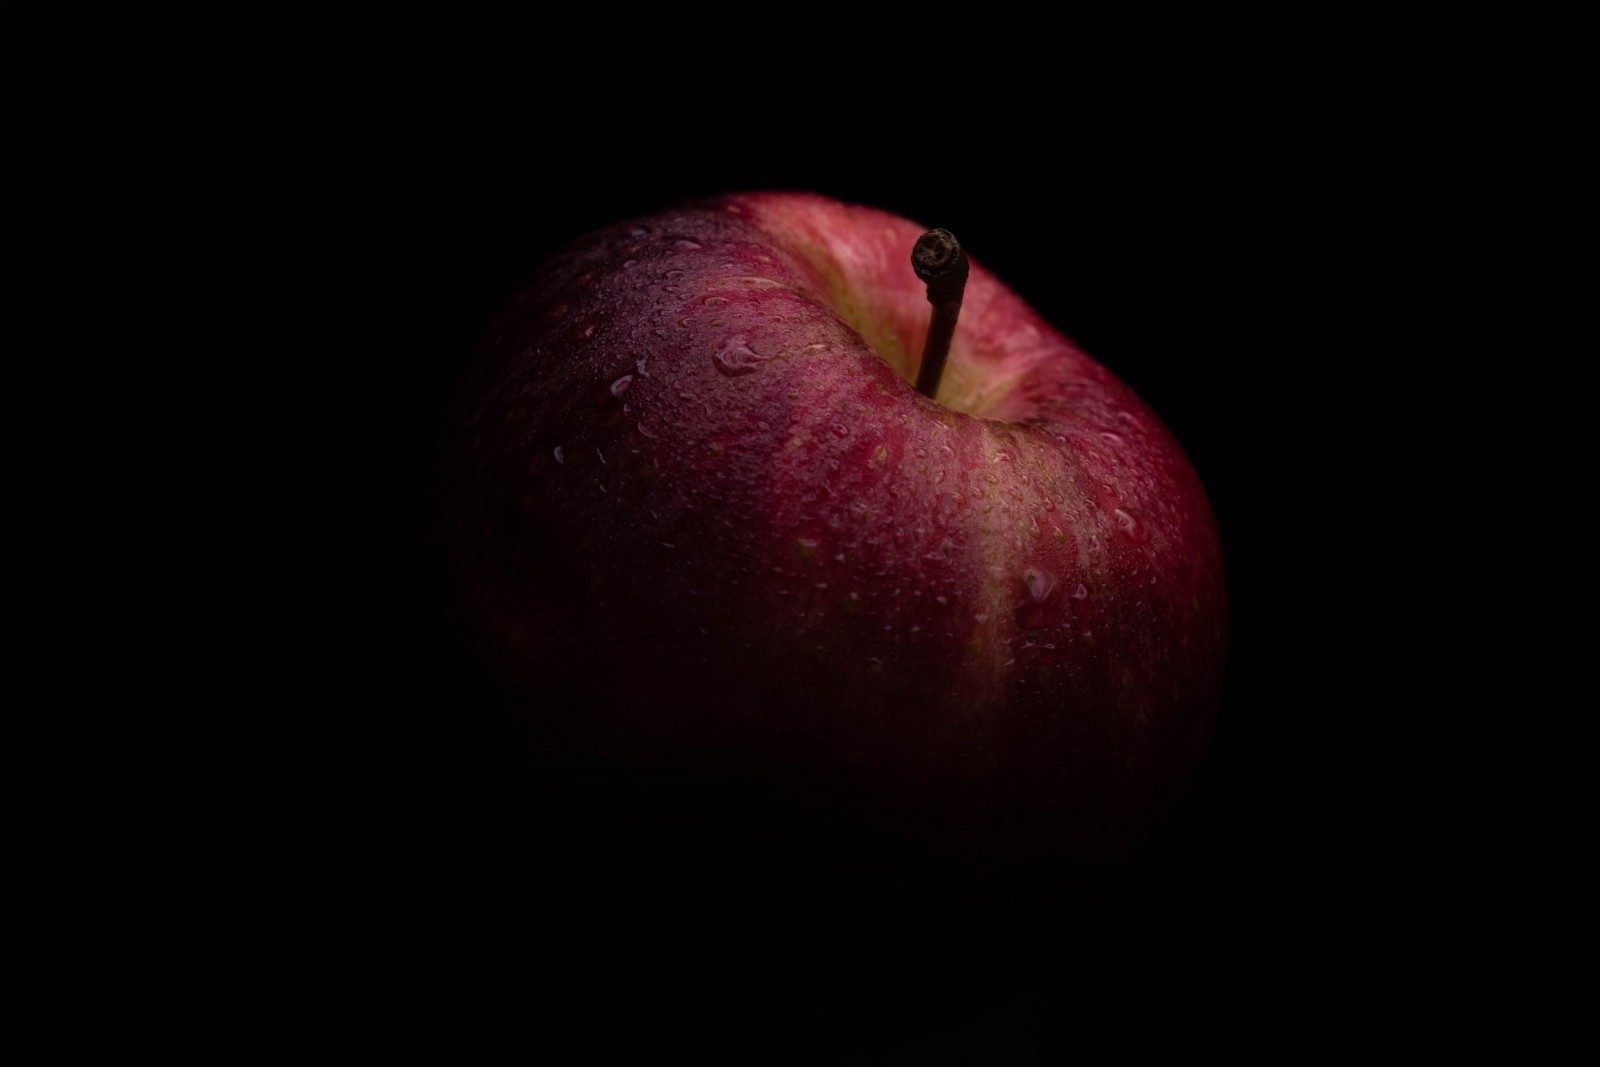 red apple with black background